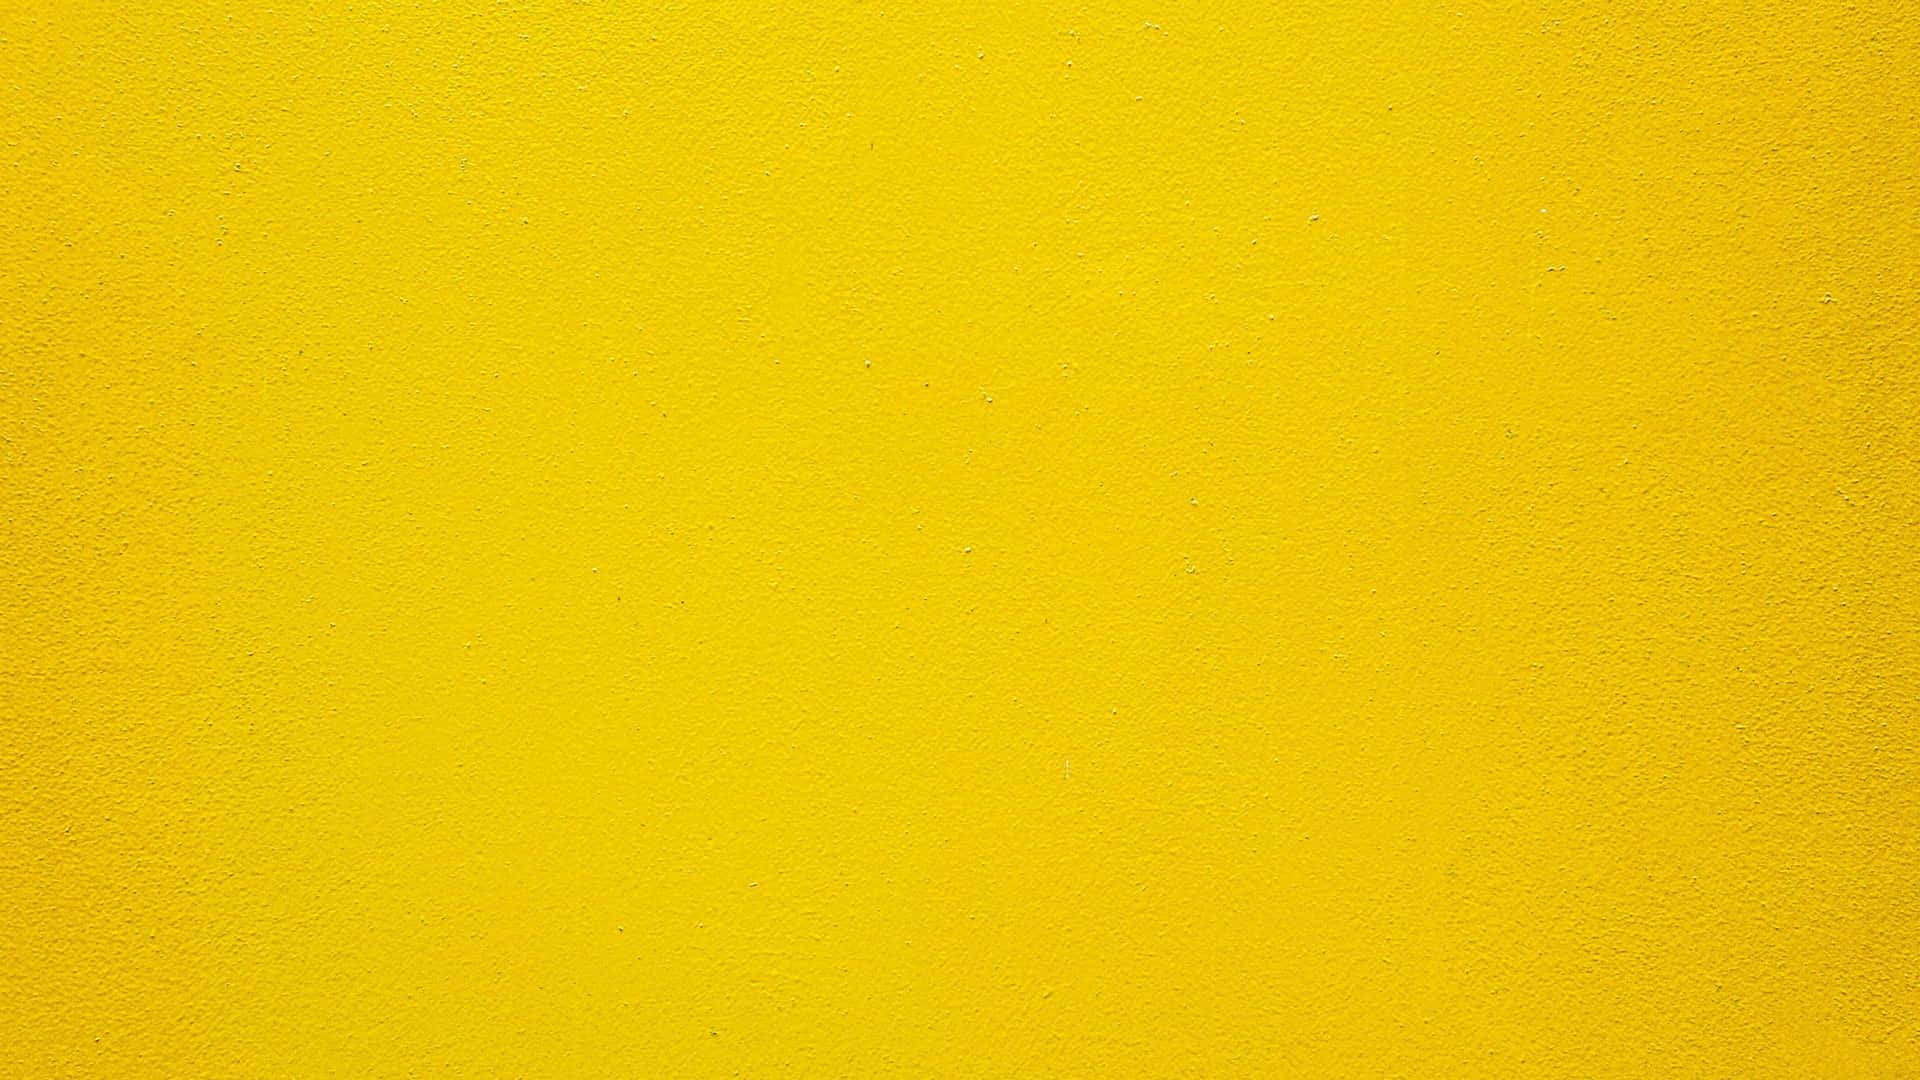 Bright yellow texture background